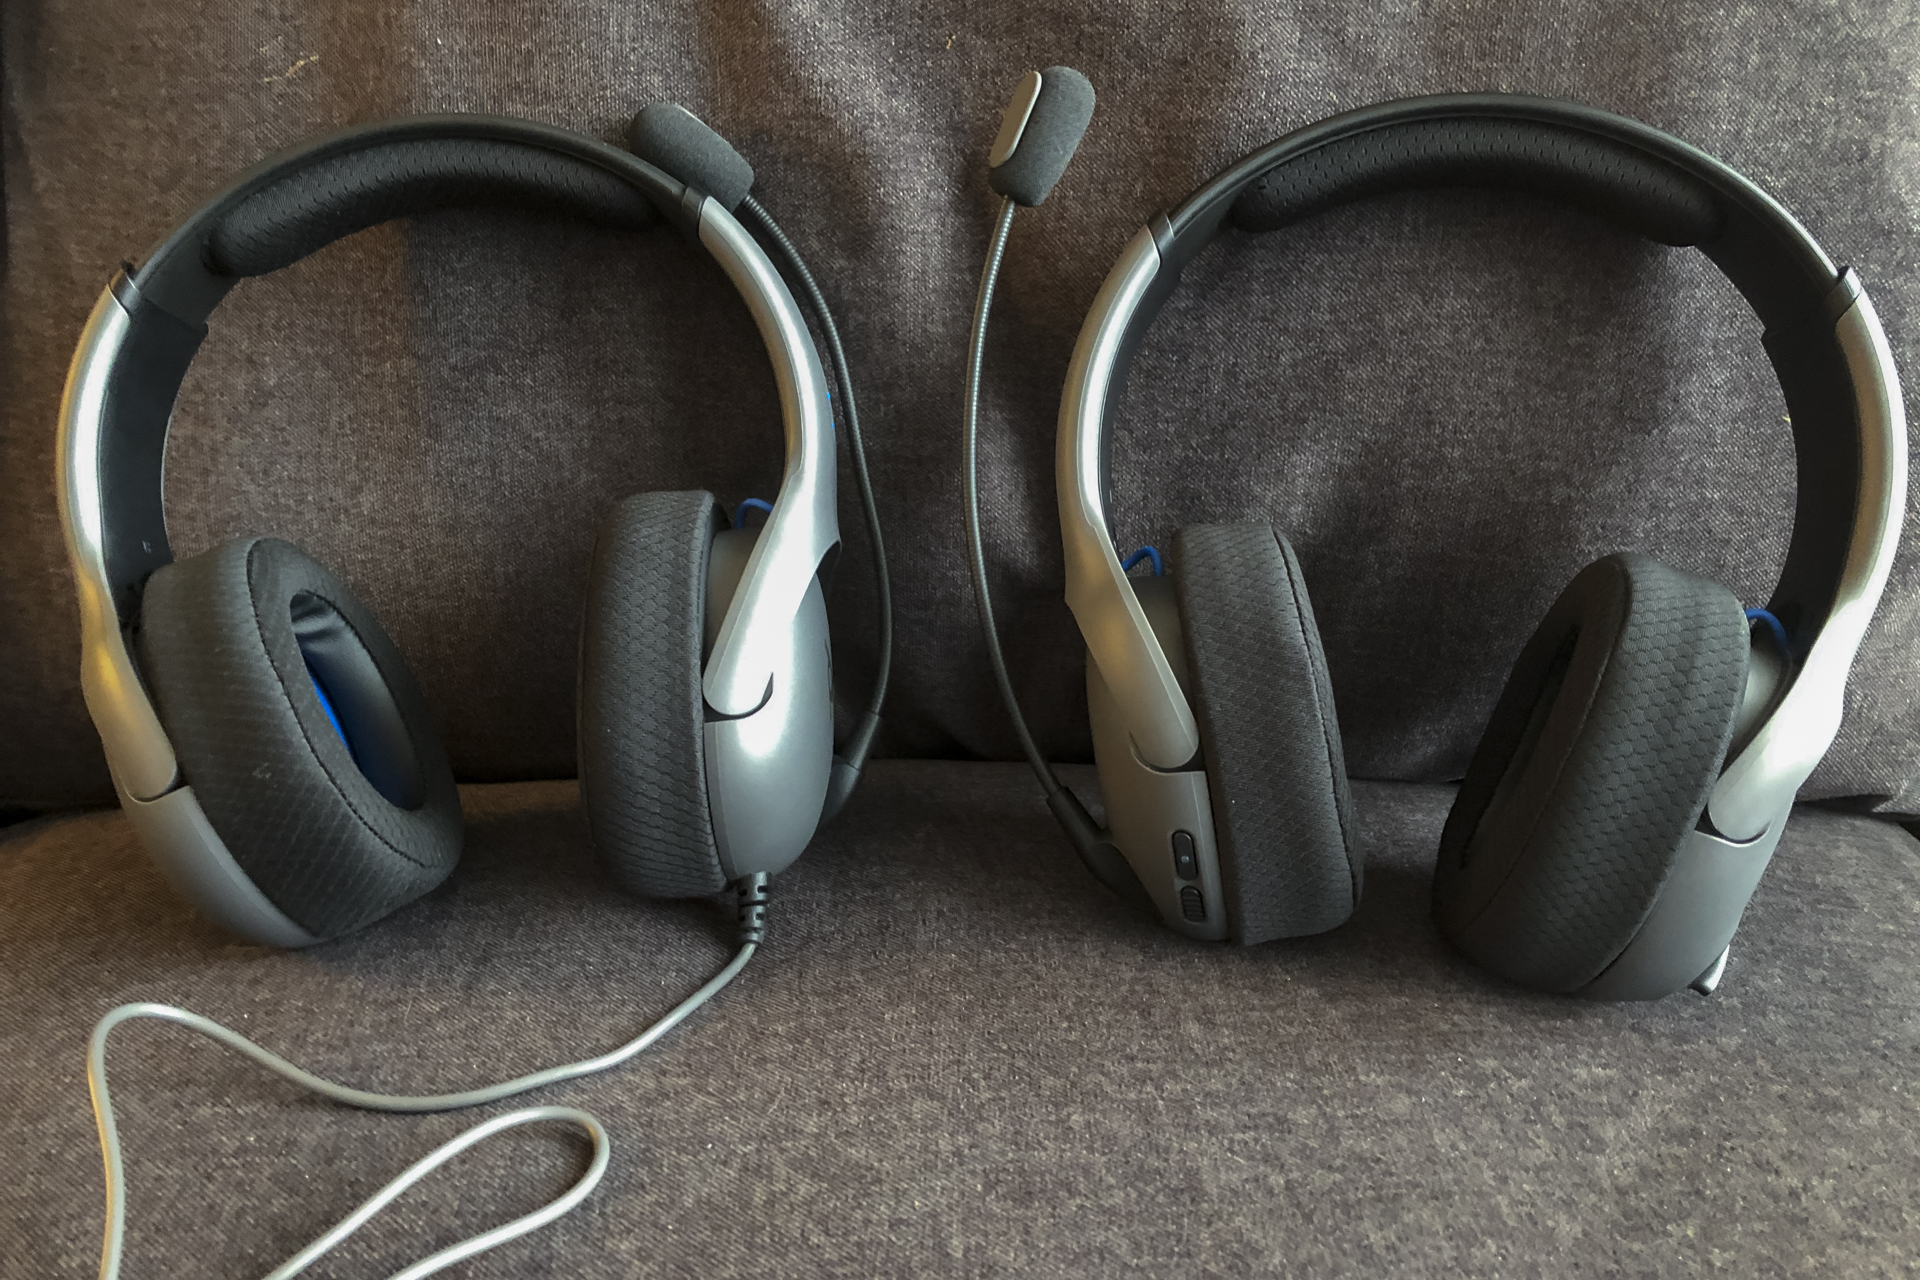 The PDP LVL 50 Headsets Prove Price Doesn't Always Equal Quality